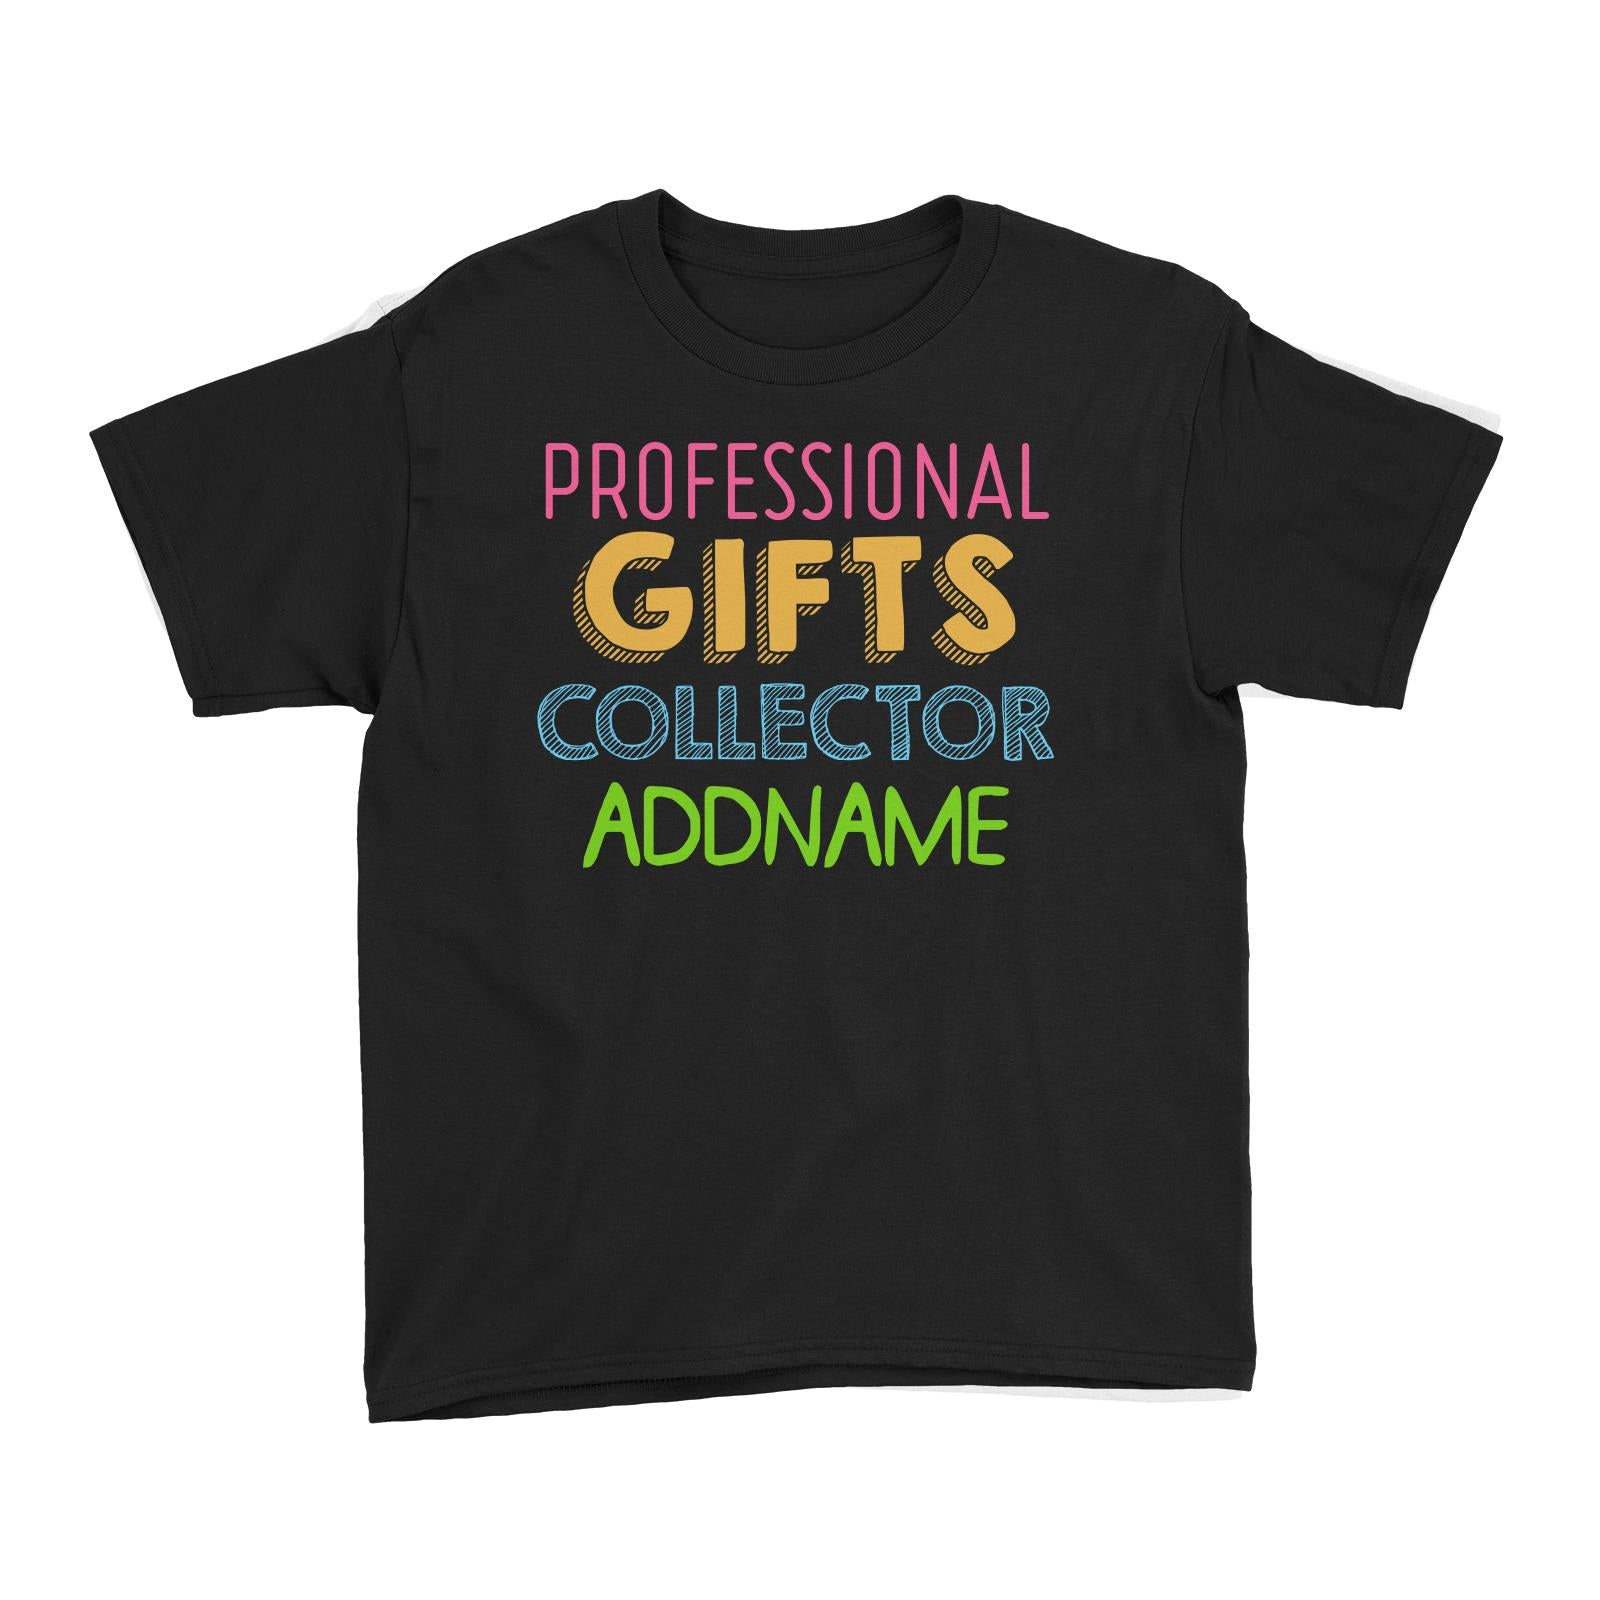 Professional Gifts Collector Addname Kid's T-Shirt